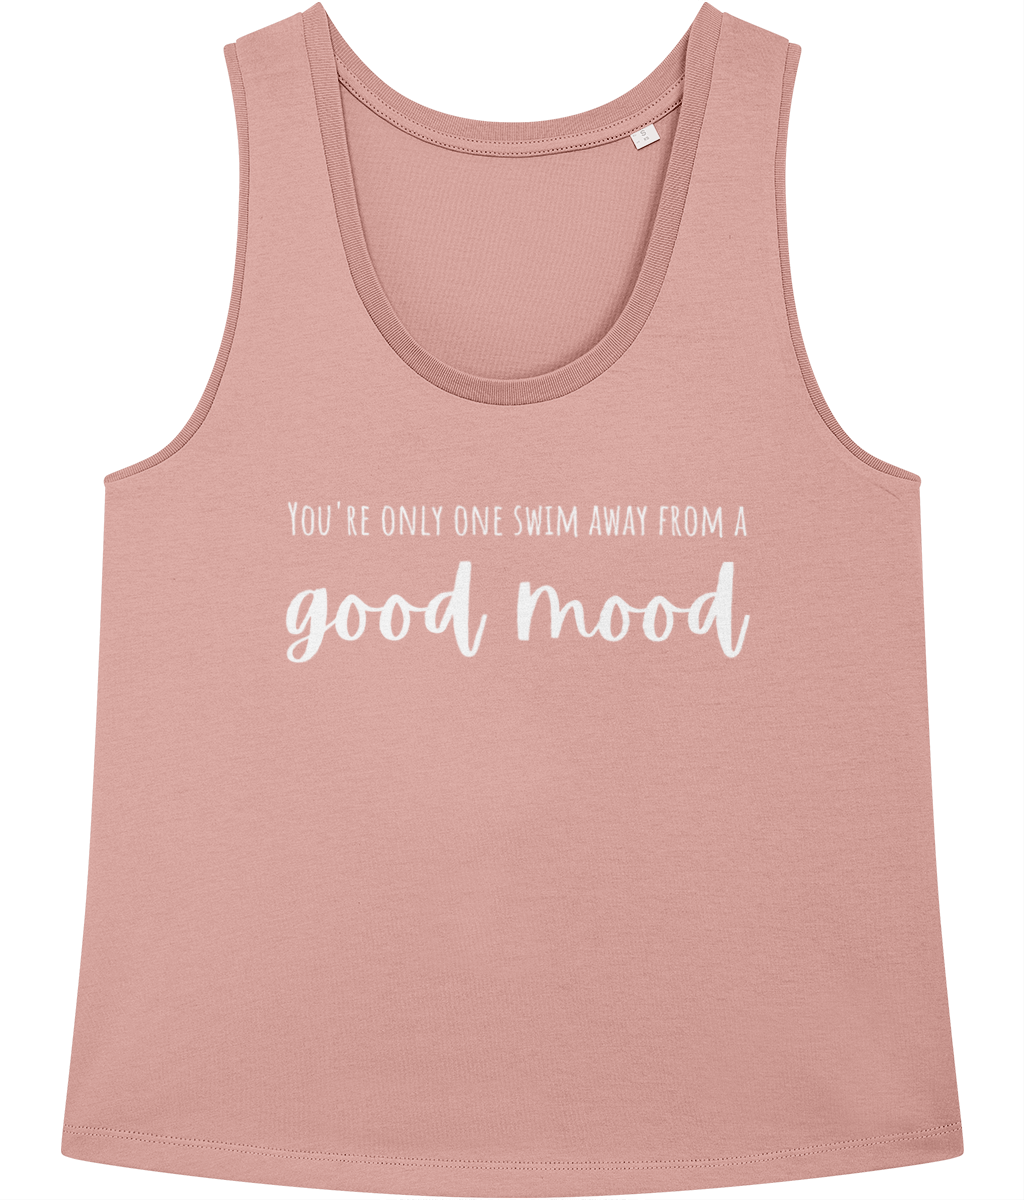 You're Only One Swim Away From A Good Mood 100% Organic Cotton Vest Top